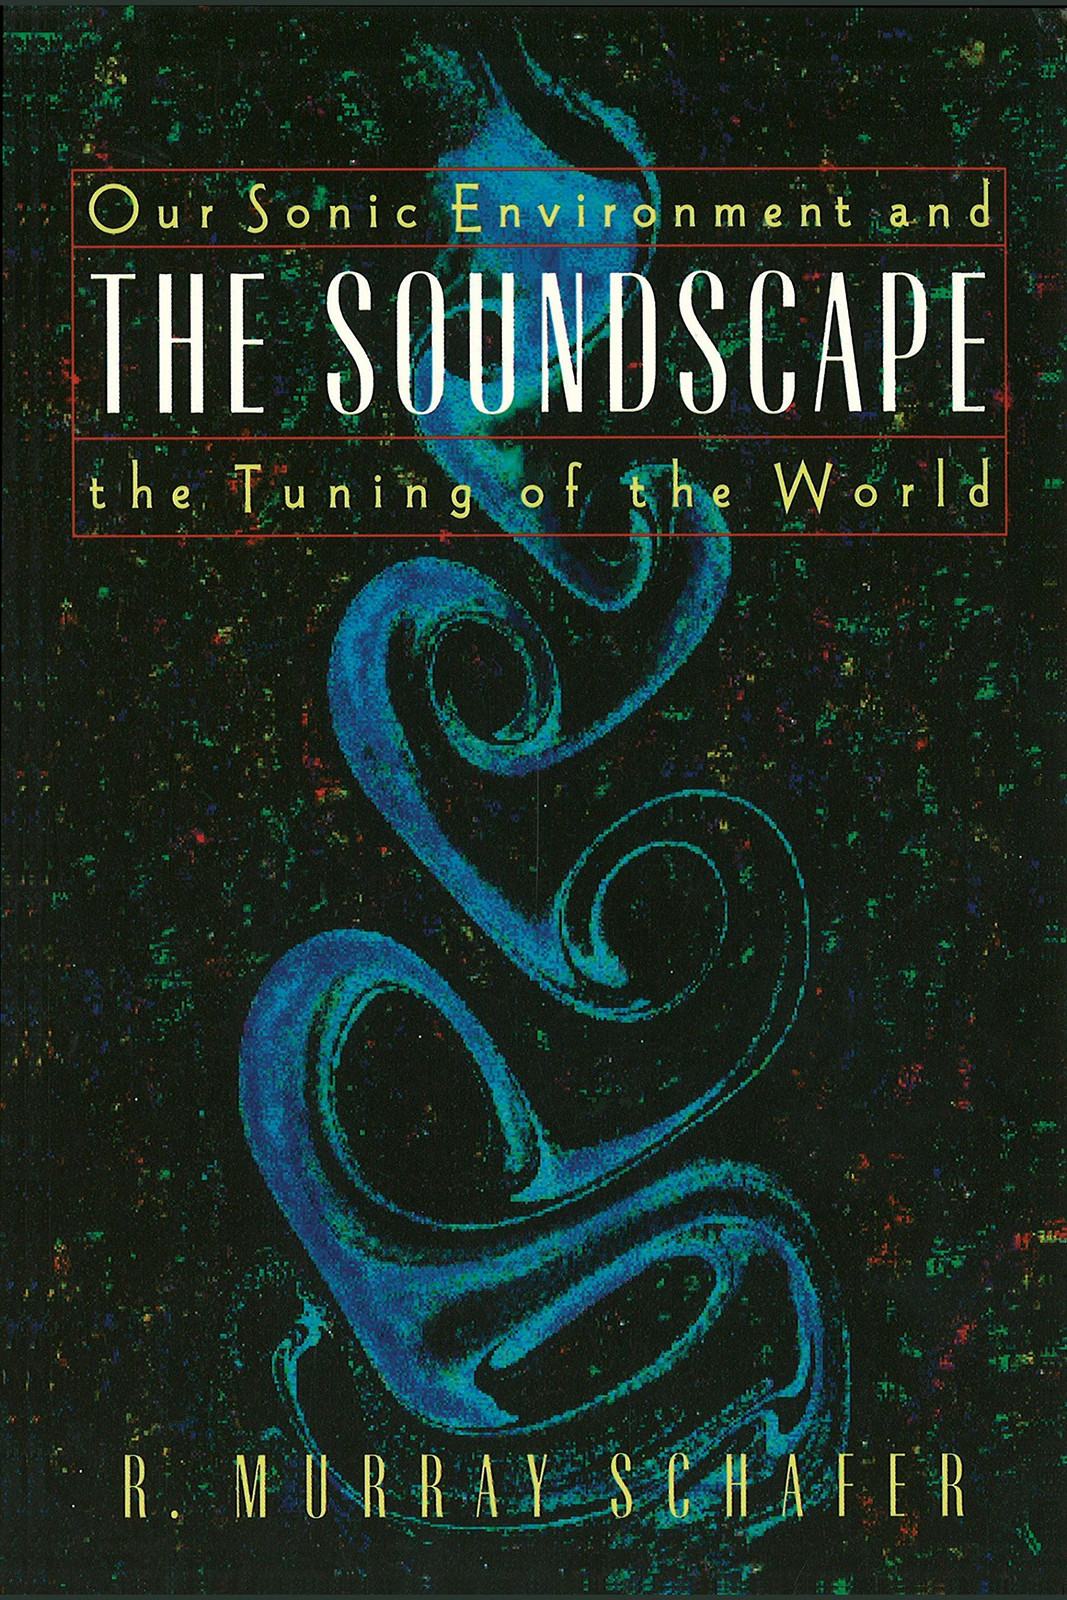 Raymond Murray Schafer. The Soundscape. Our Sonic Environment and the Tuning of the World, Destiny Books, 1977